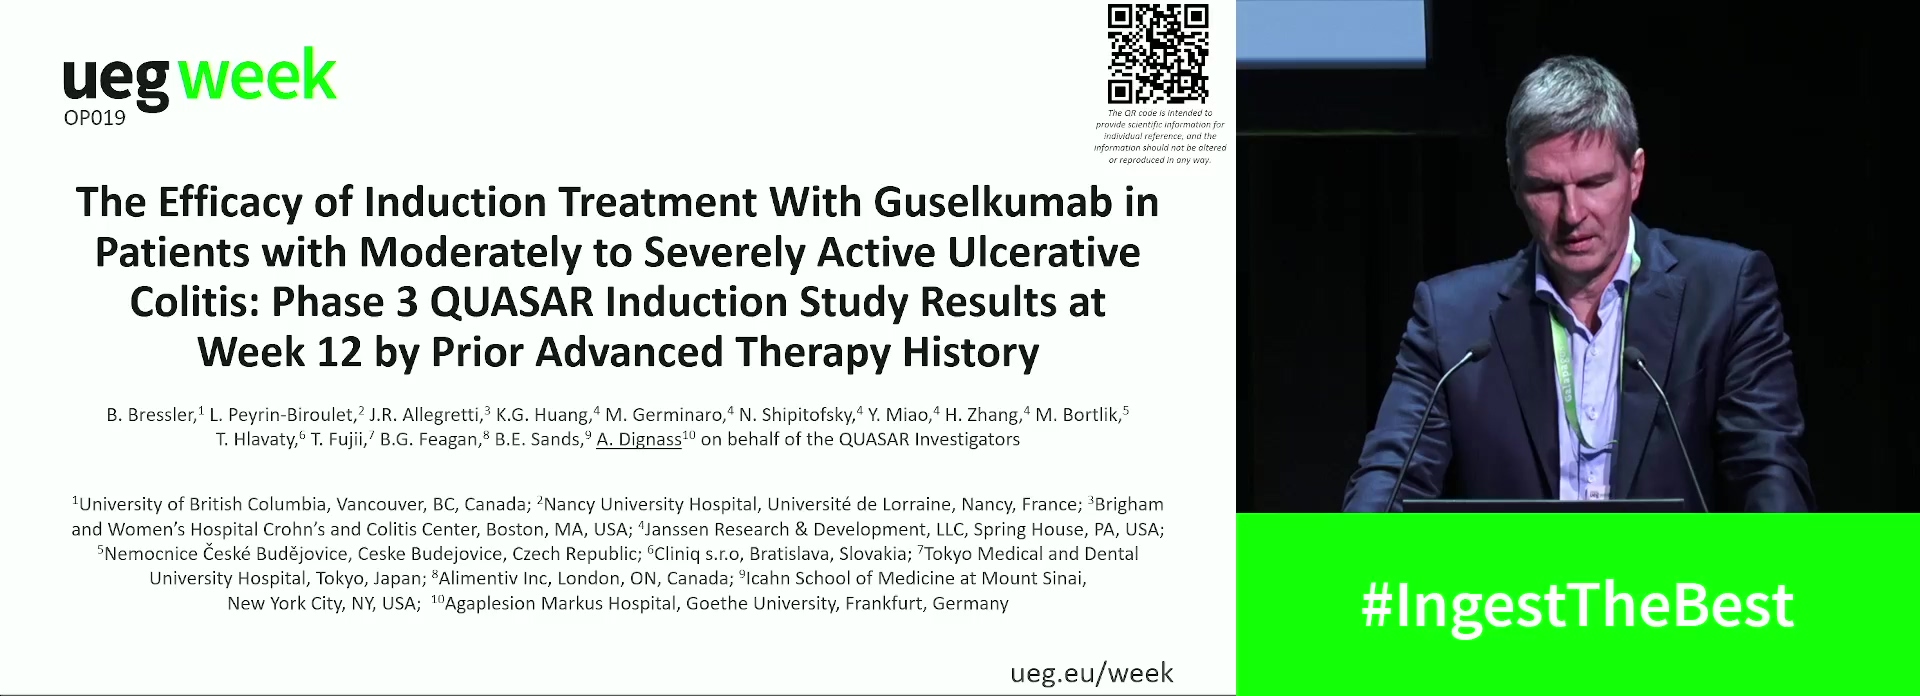 THE EFFICACY OF INDUCTION TREATMENT WITH GUSELKUMAB IN PATIENTS WITH MODERATELY TO SEVERELY ACTIVE ULCERATIVE COLITIS: PHASE 3 QUASAR INDUCTION STUDY RESULTS AT WEEK 12 BY PRIOR ADVANCED THERAPY HISTORY